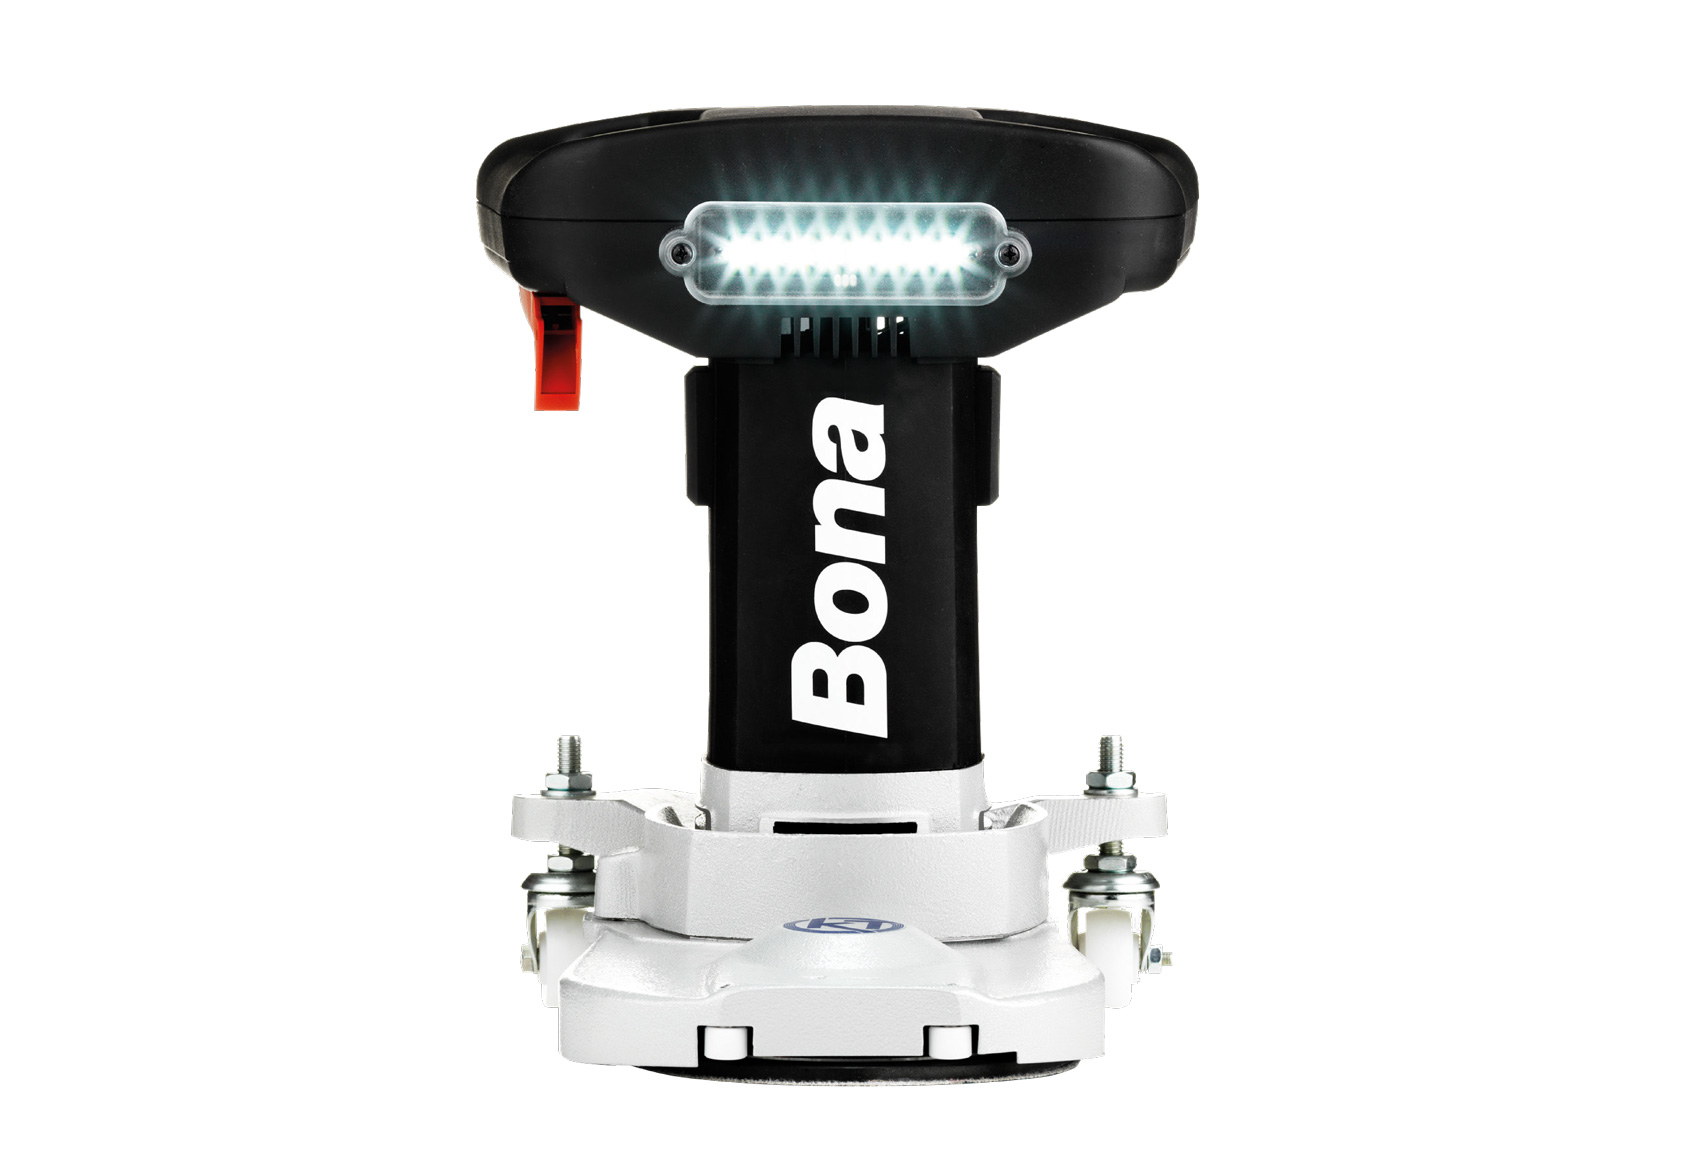 Bona CombiEdge is fitted with super bright LED lights for better visibility and a great result